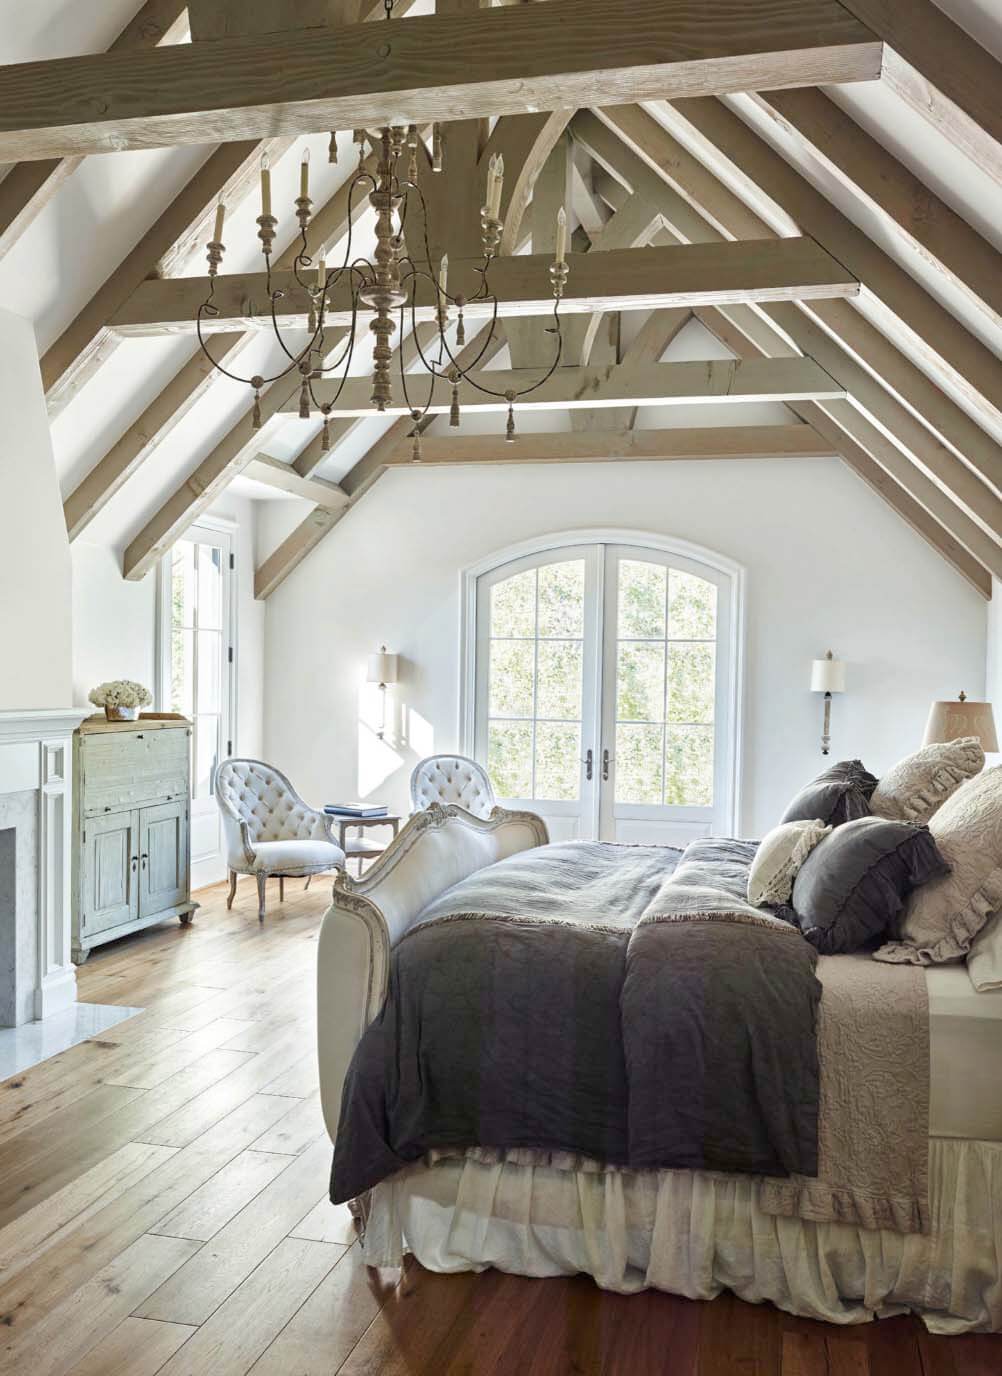 Oversized Chandelier and Exposed Beams